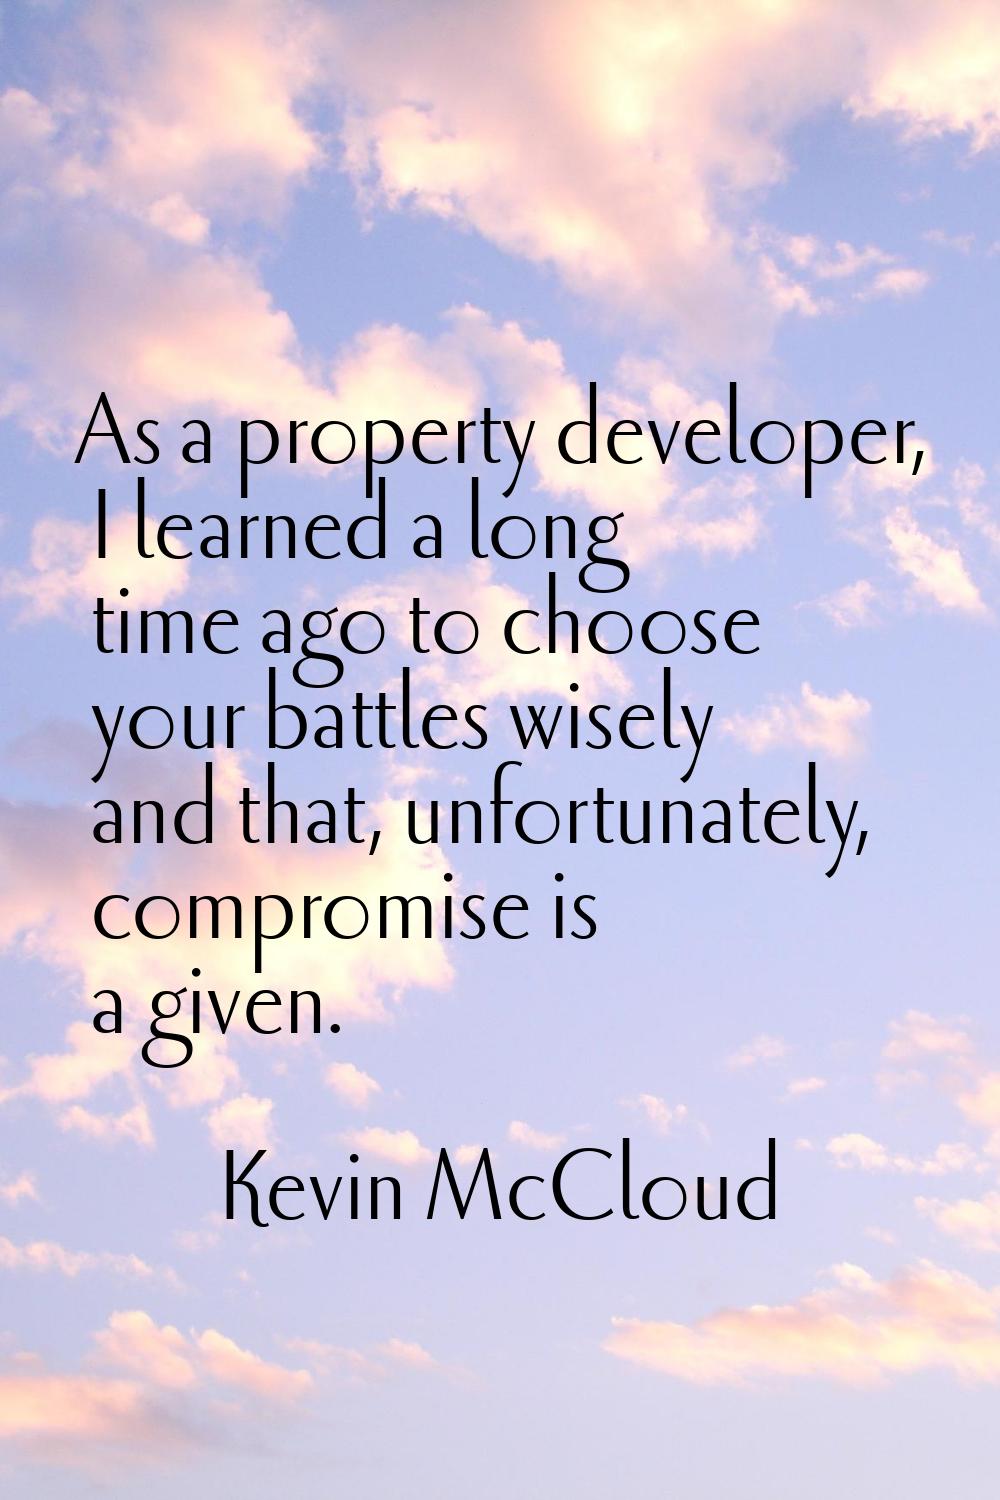 As a property developer, I learned a long time ago to choose your battles wisely and that, unfortun